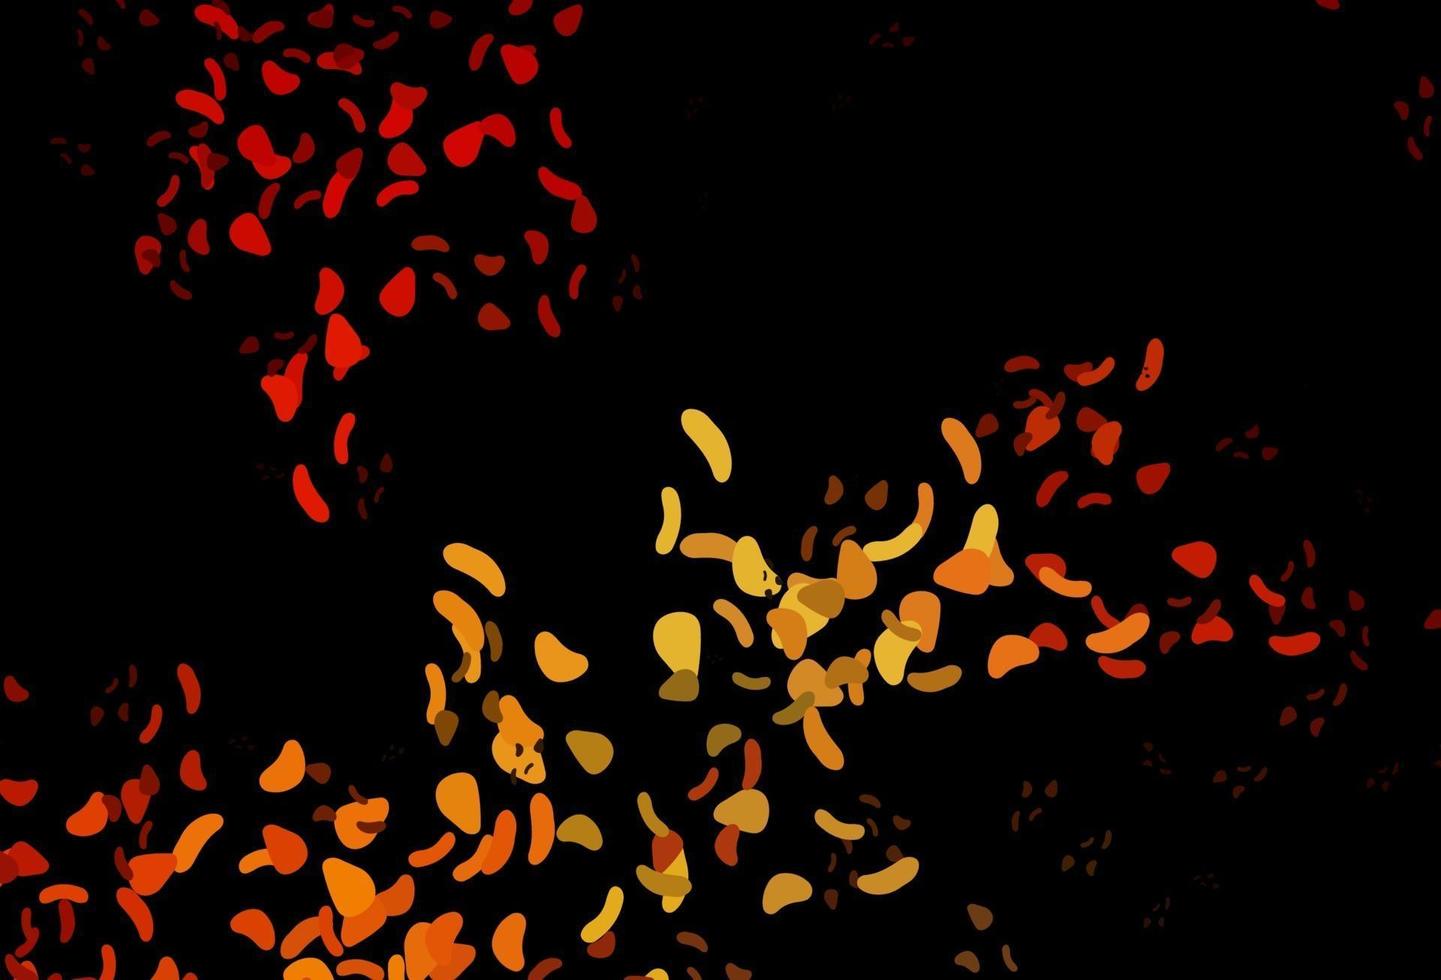 Dark Red, Yellow vector background with abstract forms.